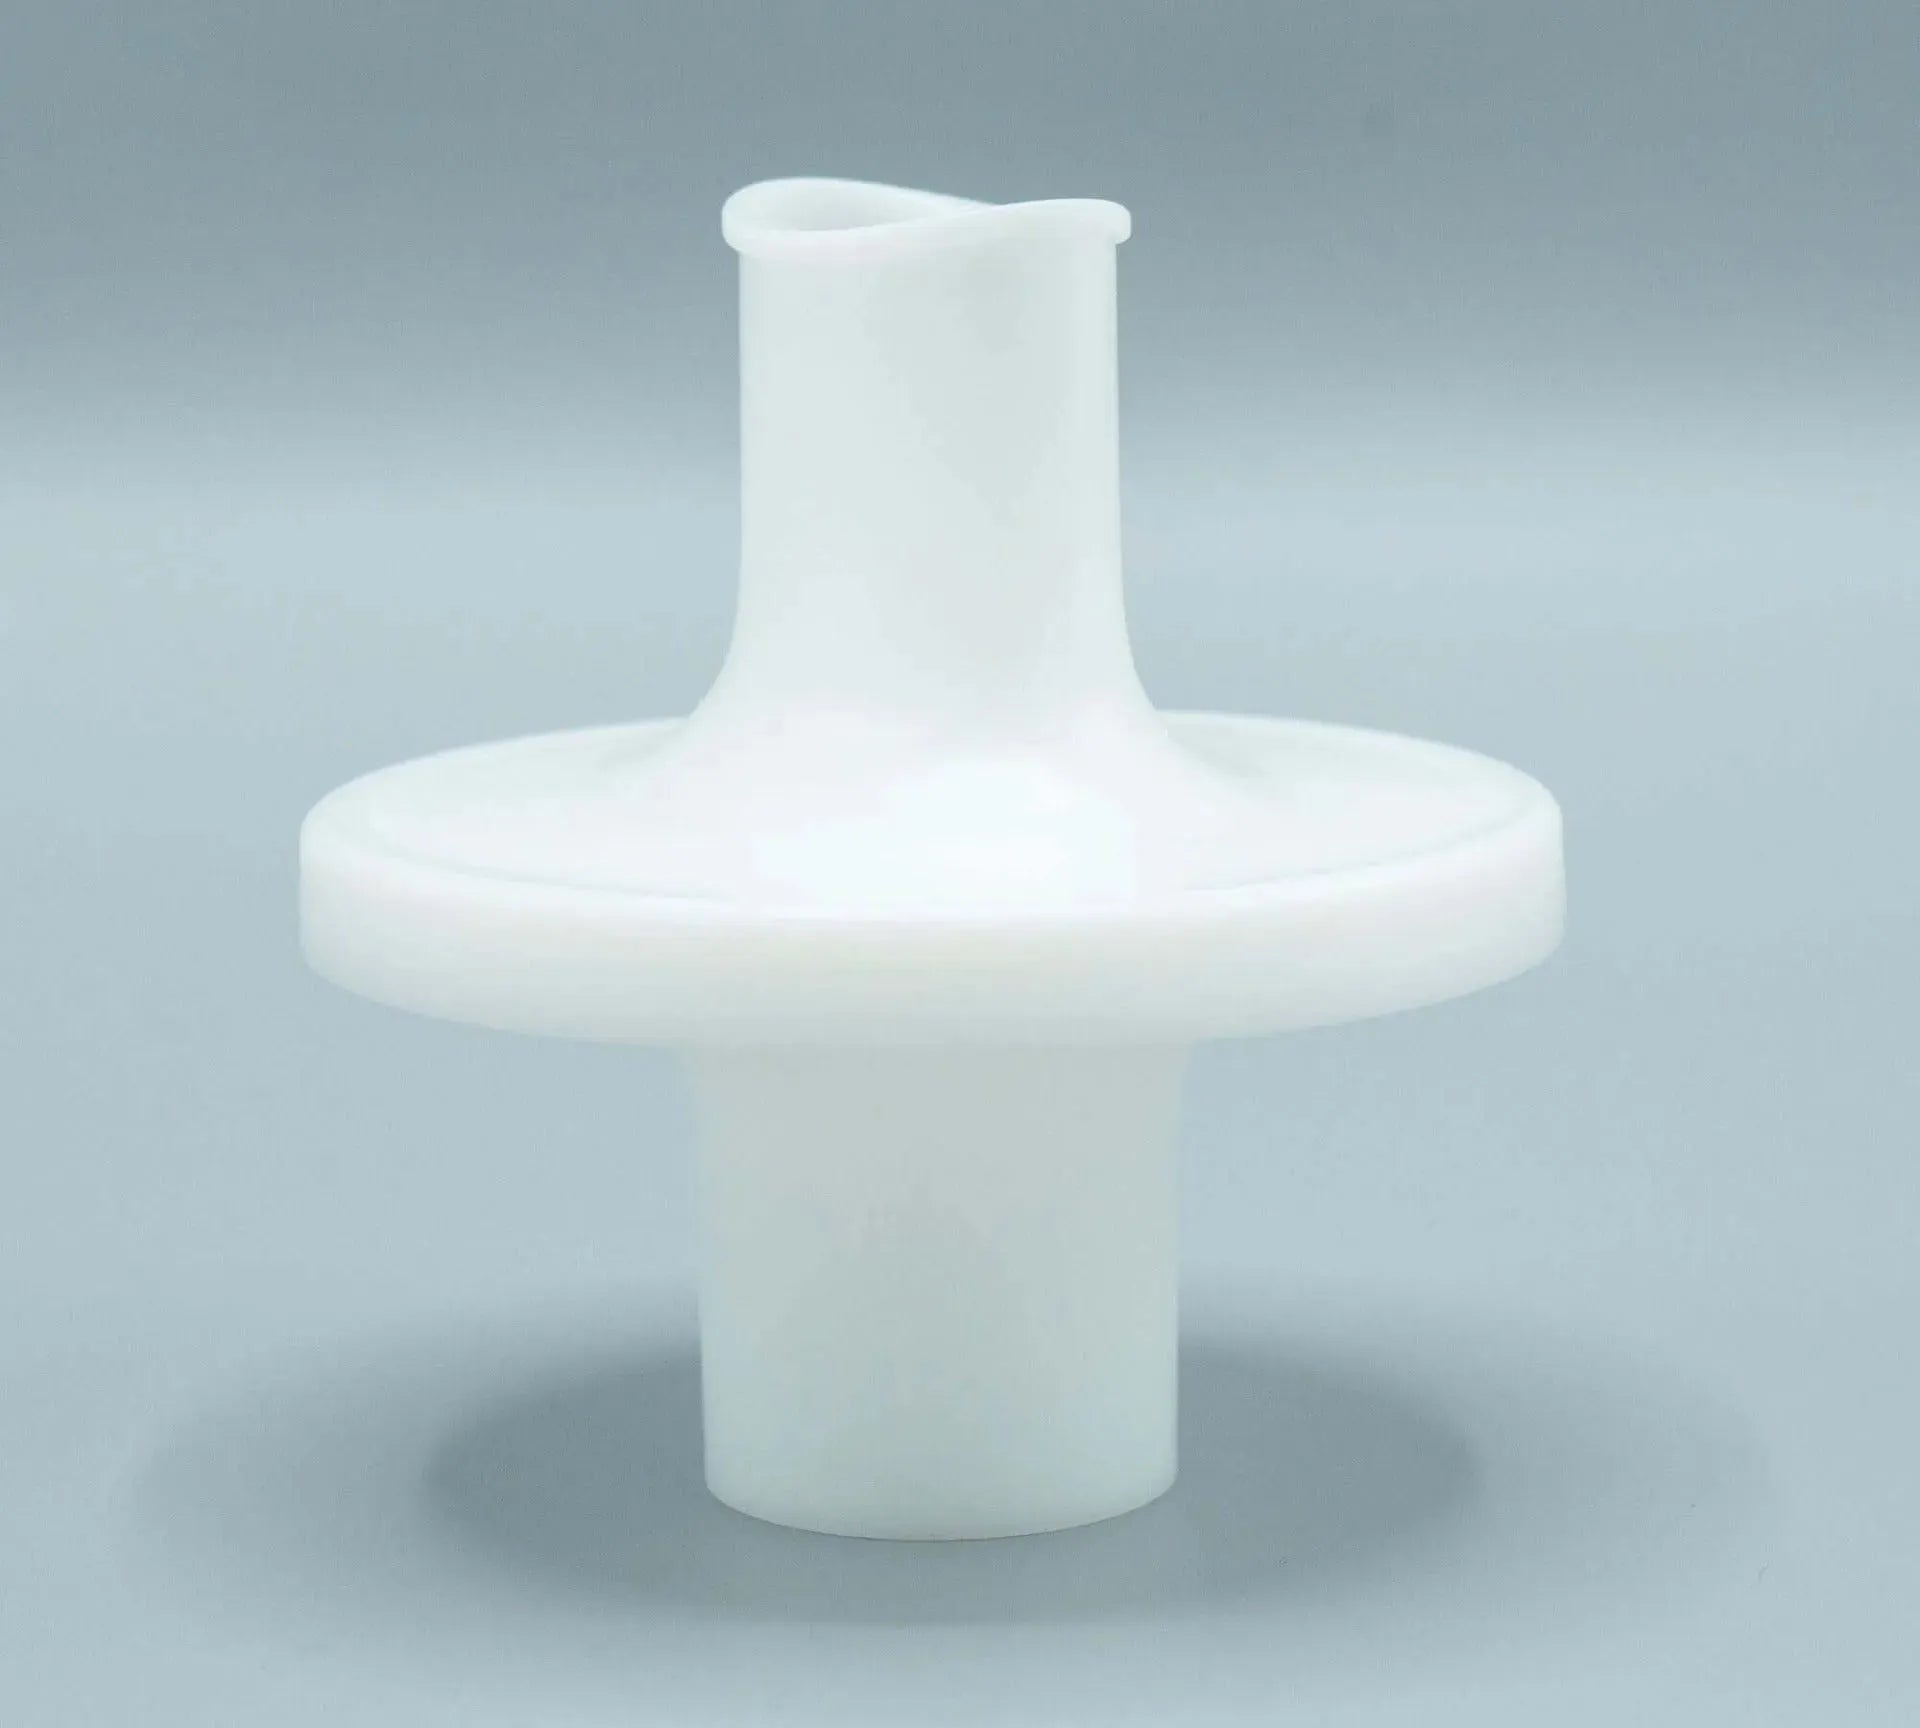 The bacterial/viral filter mouthpiece shown is elliptical in shape, white in color, and has a ridge around the opening, making it easier to maintain a seal.